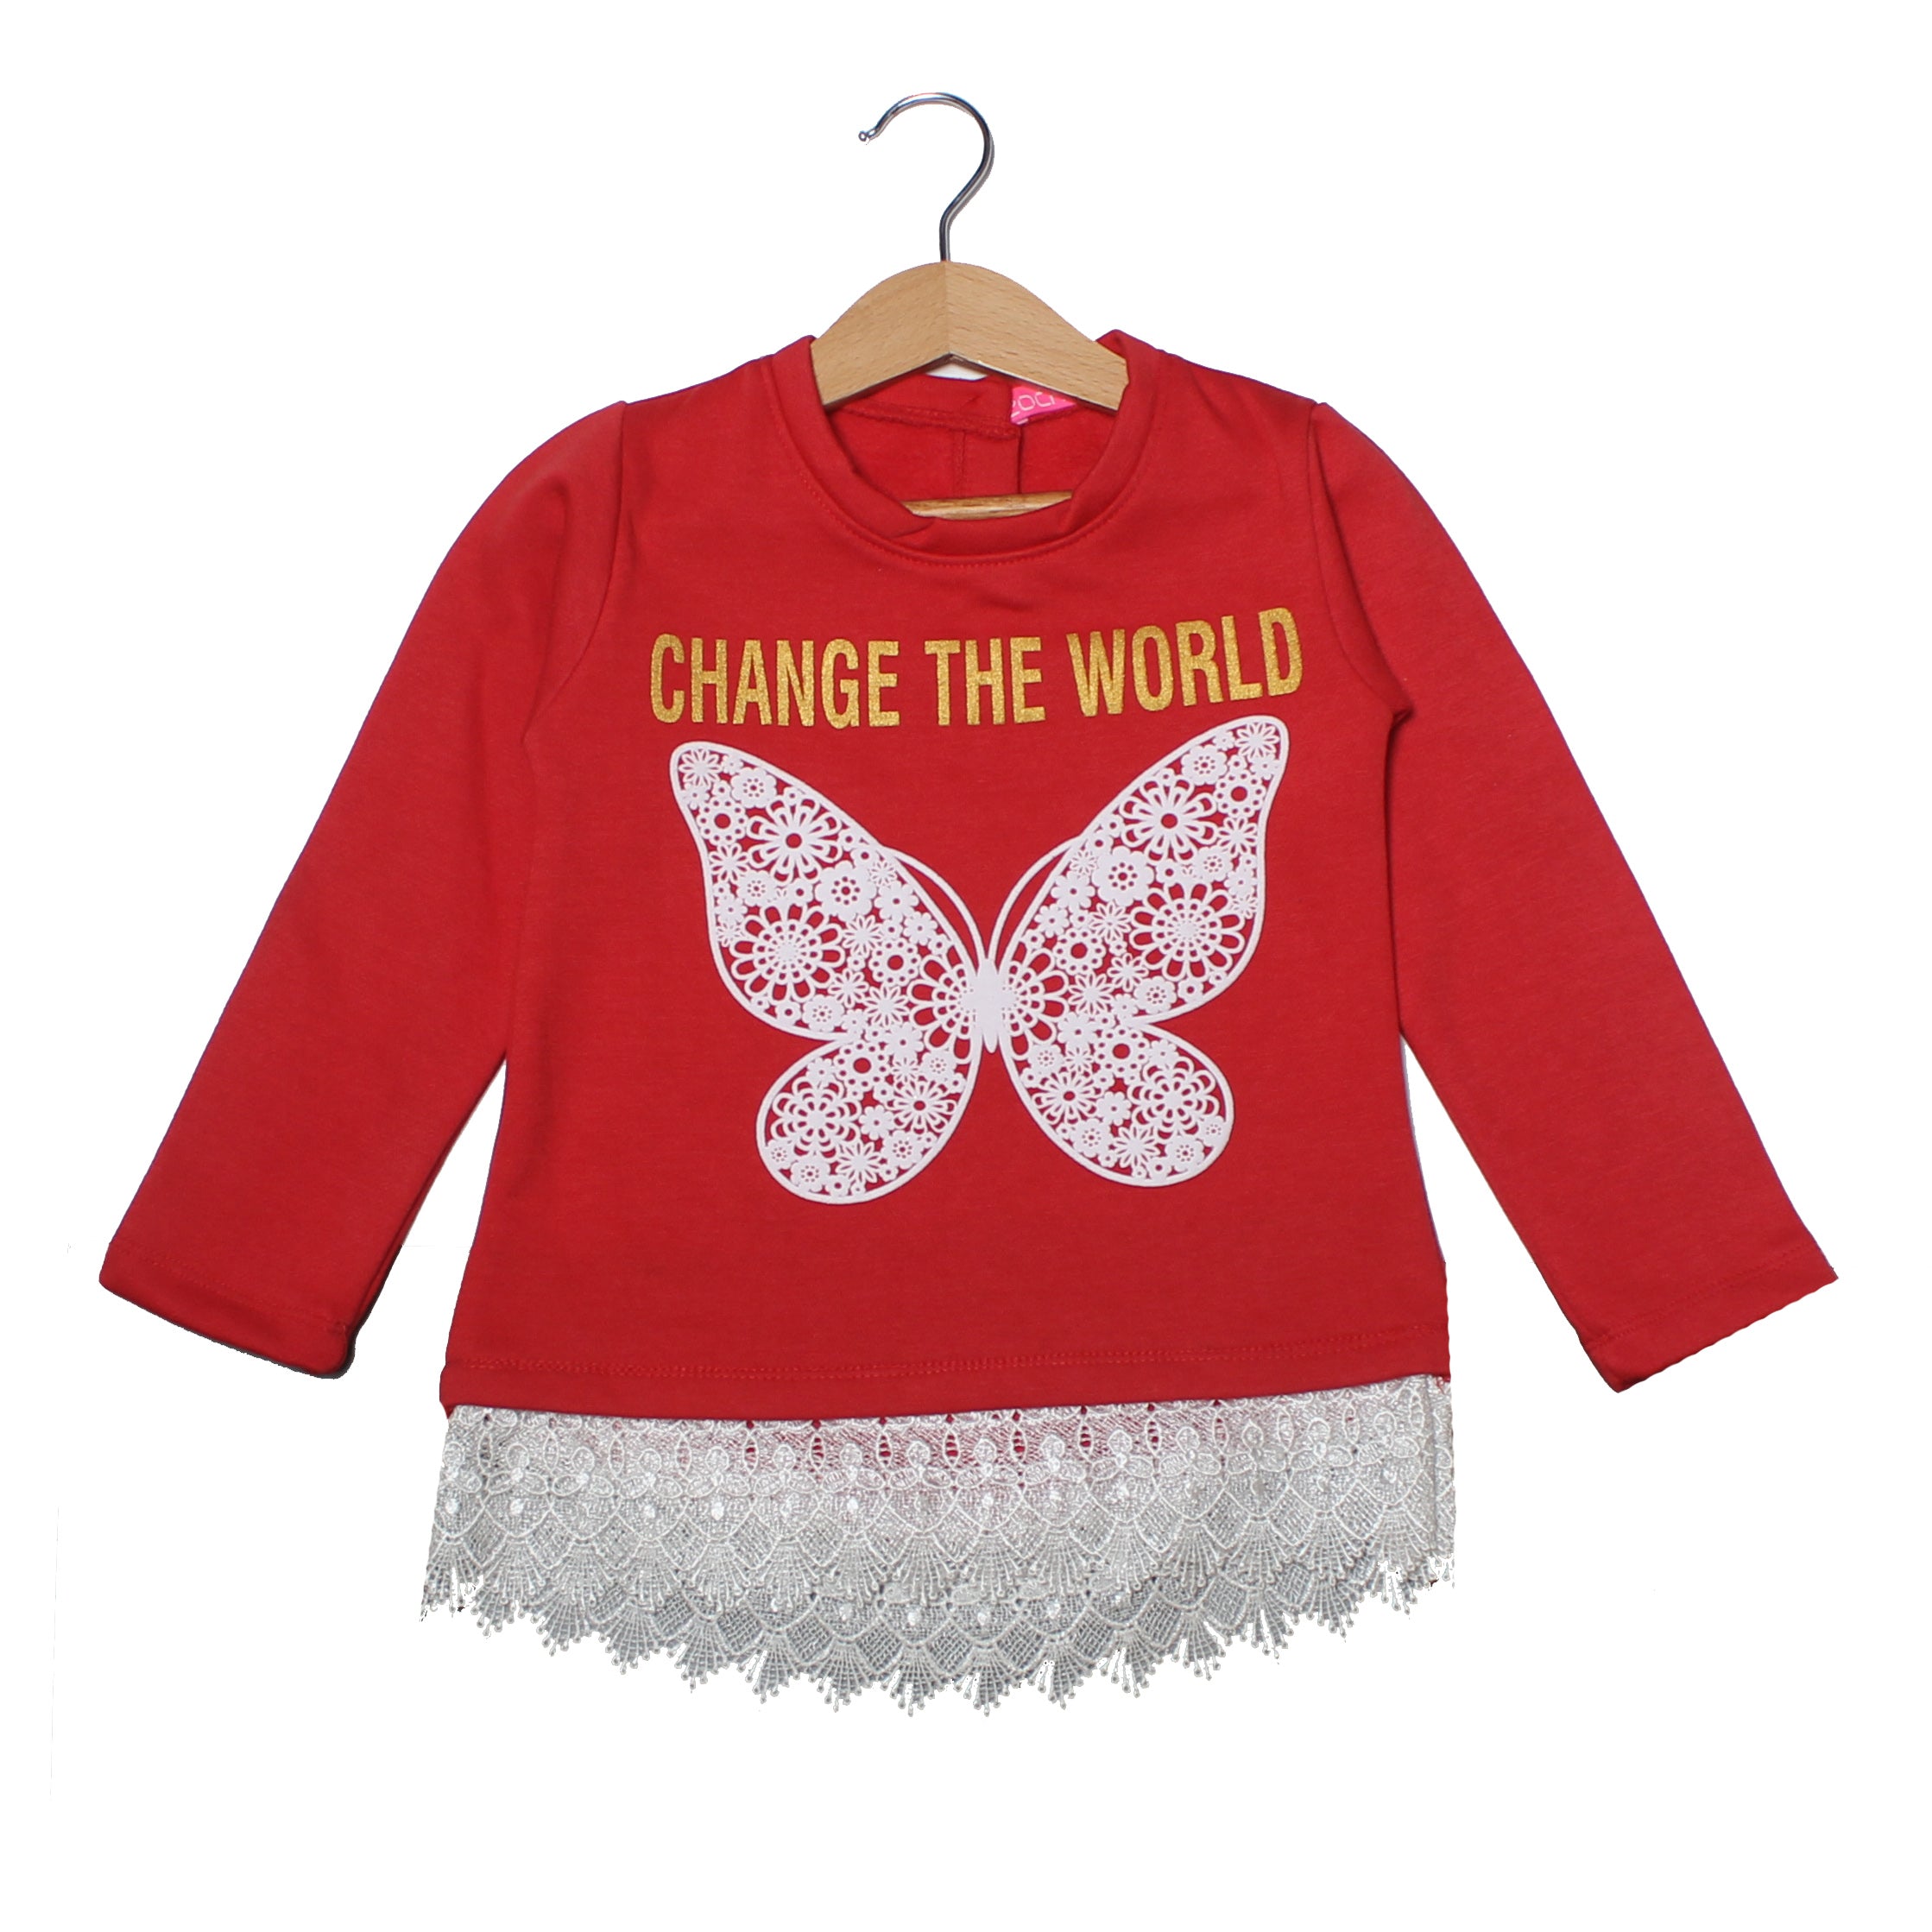 NEW RED CHANGE THE WORLD BUTTERFLY PRINTED TOP FOR GIRLS